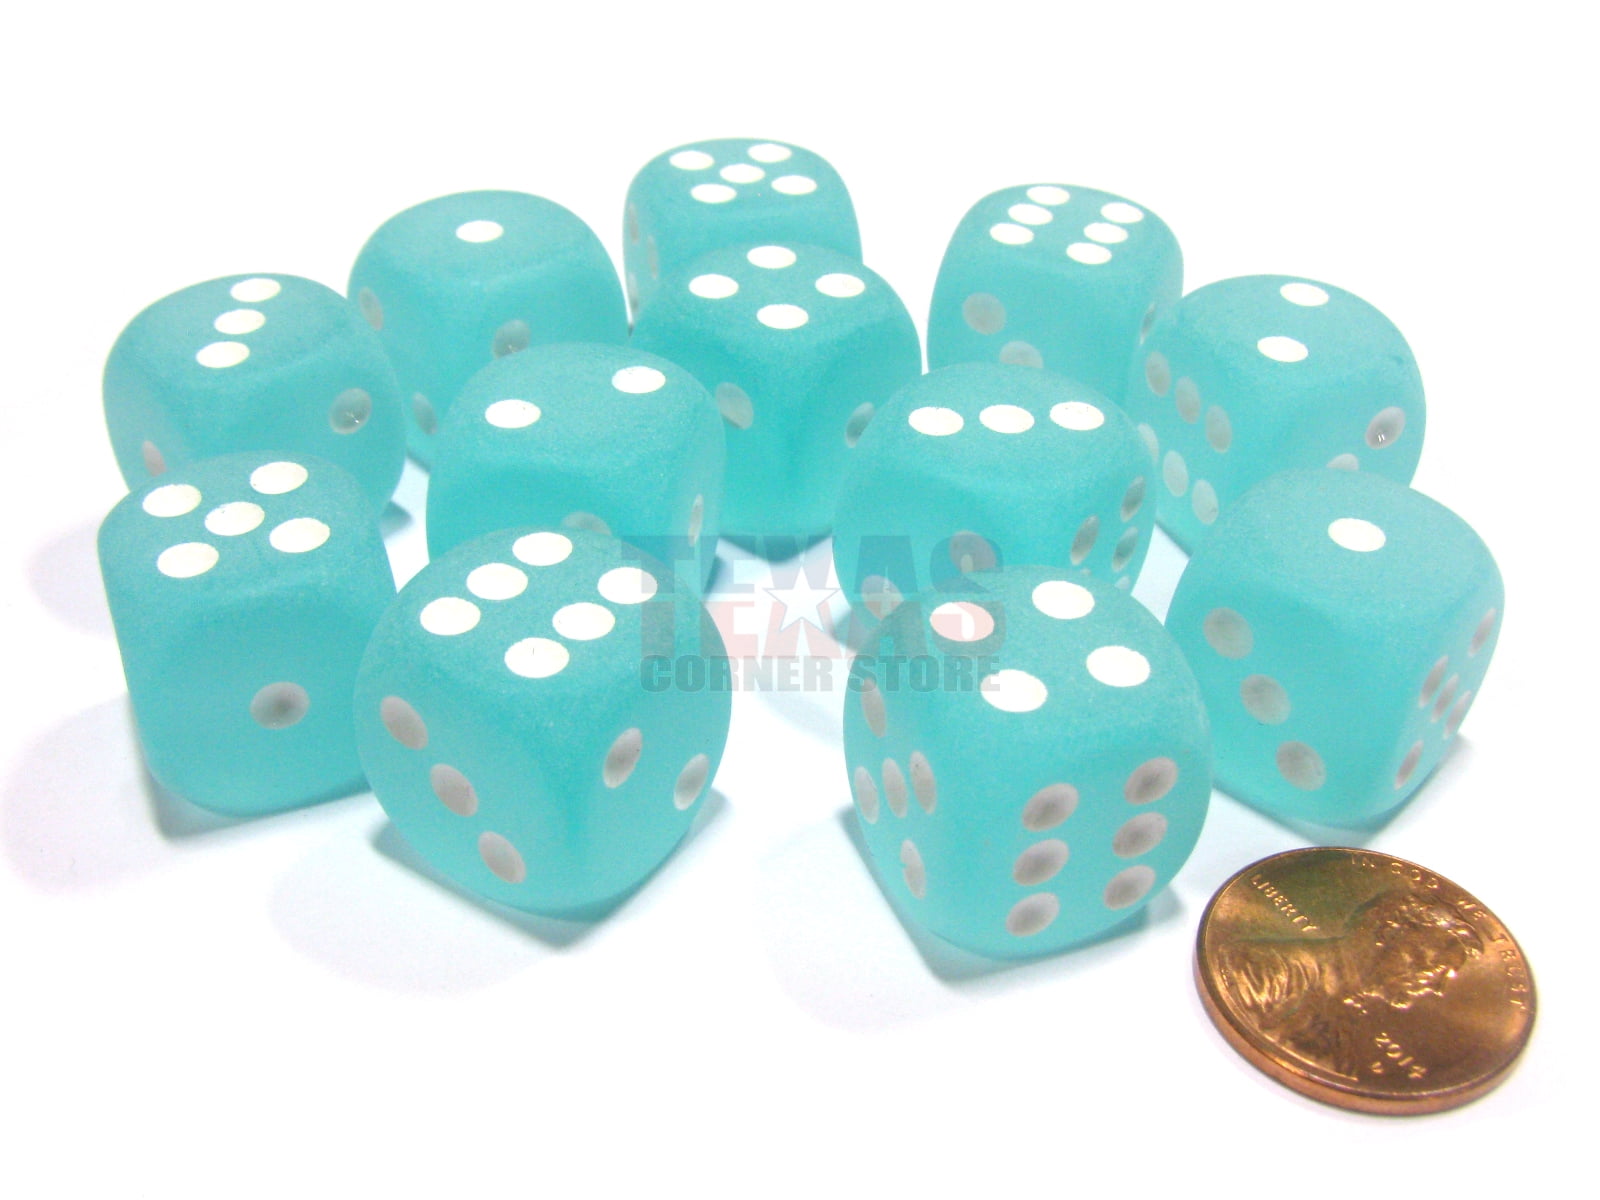 Chessex Dice d6 Sets 16mm Frosted Teal w/ White Six Sided Die 12 Set CHX 27605 